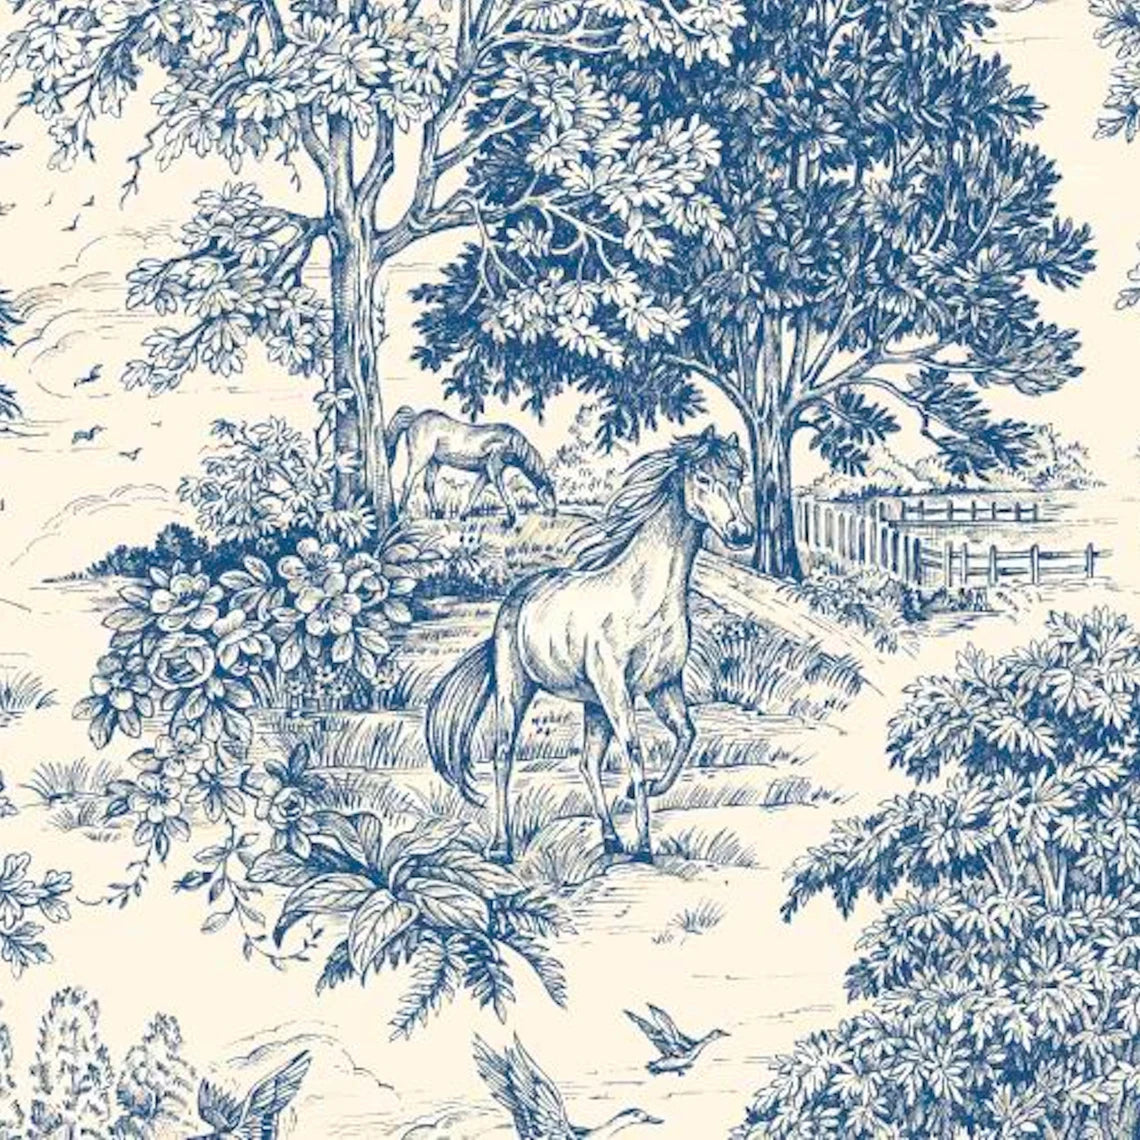 tailored crib skirt in Yellowstone Bluebell Blue Country Toile- Horses, Deer, Dogs- Large Scale